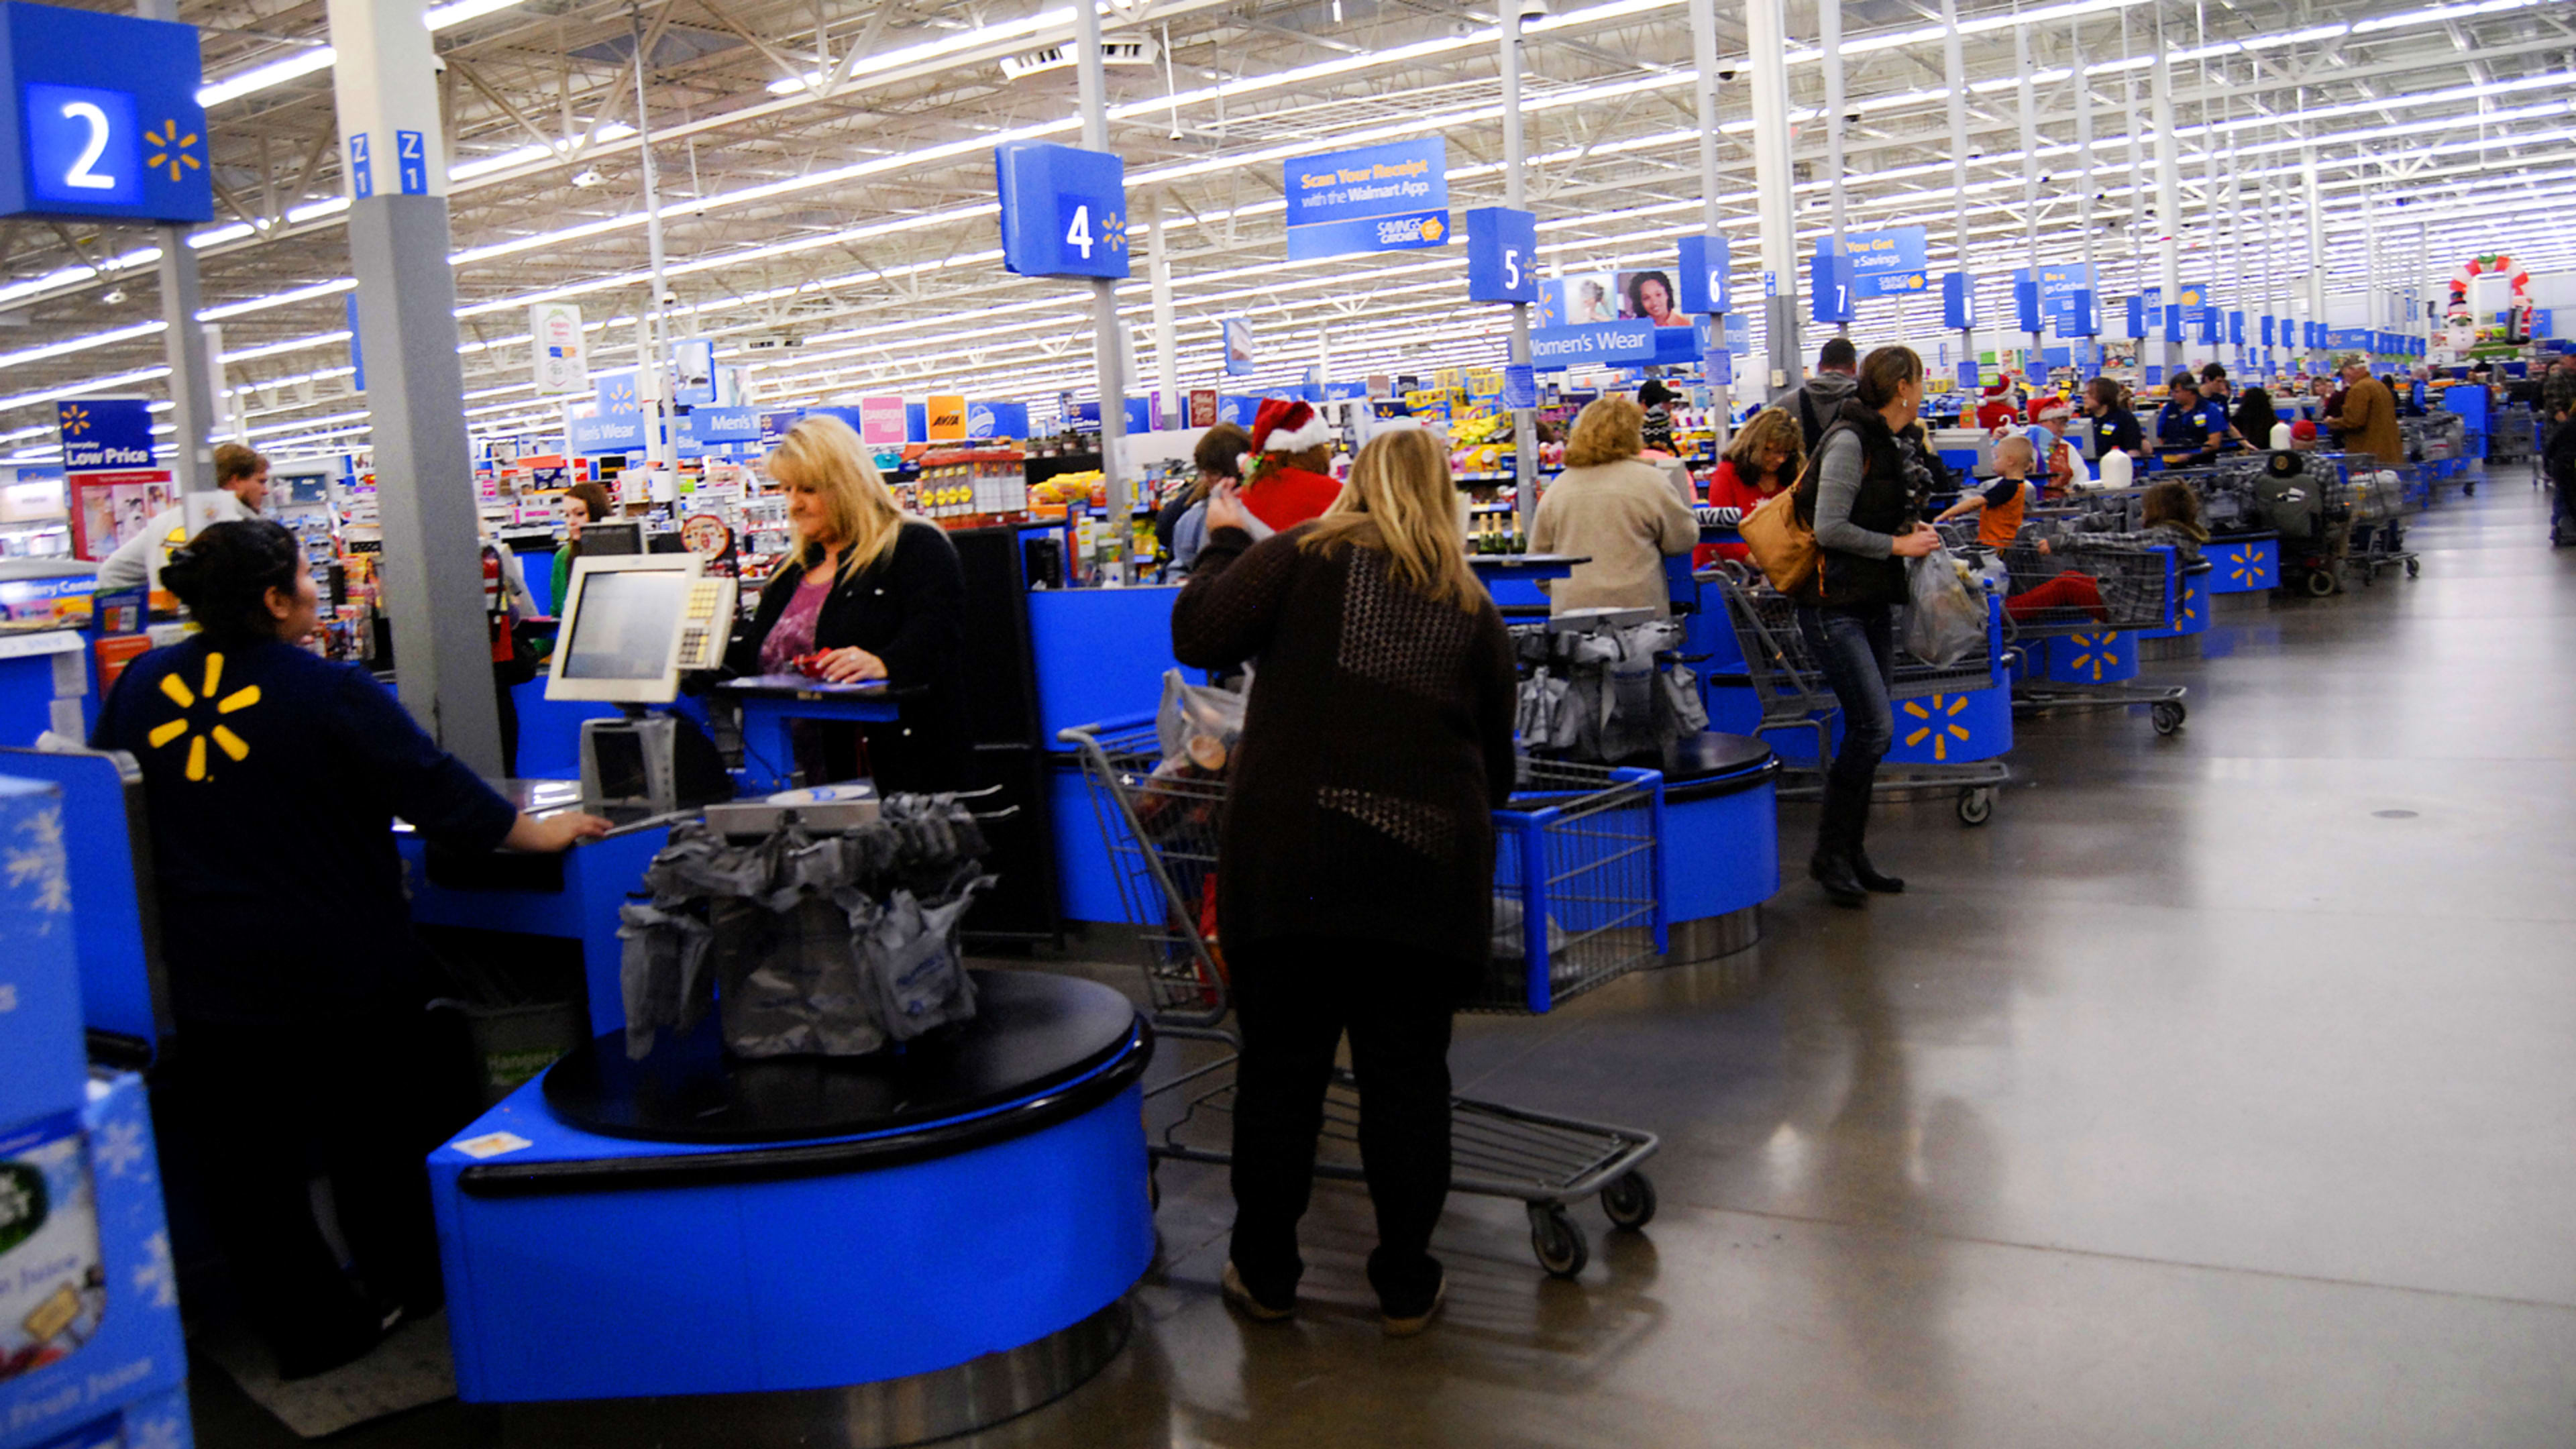 Walmart’s “Outside The Box” Podcast Is Engaging, But…